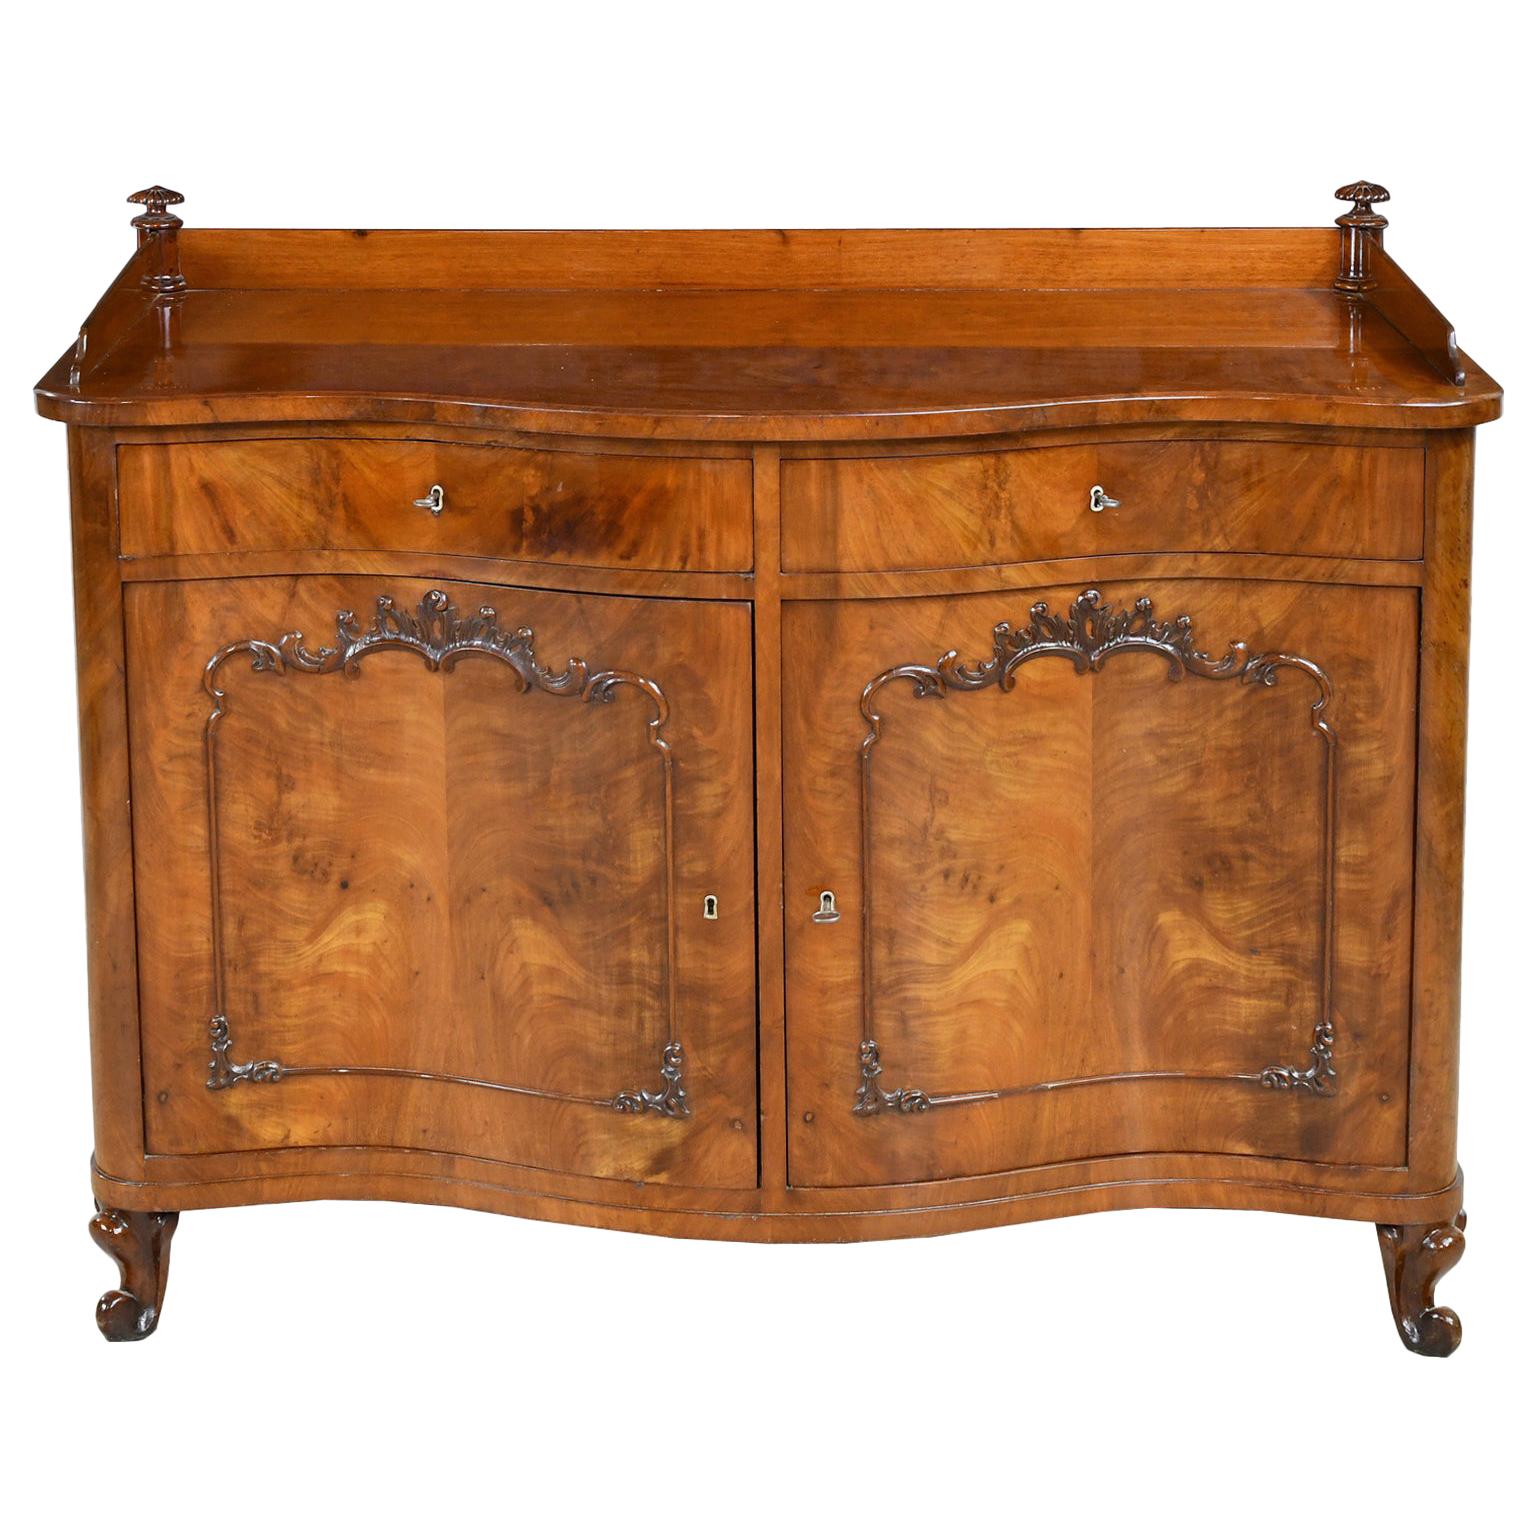 Christian VIII Serpentine-Front Sideboard in West Indies Mahogany, circa 1850 For Sale